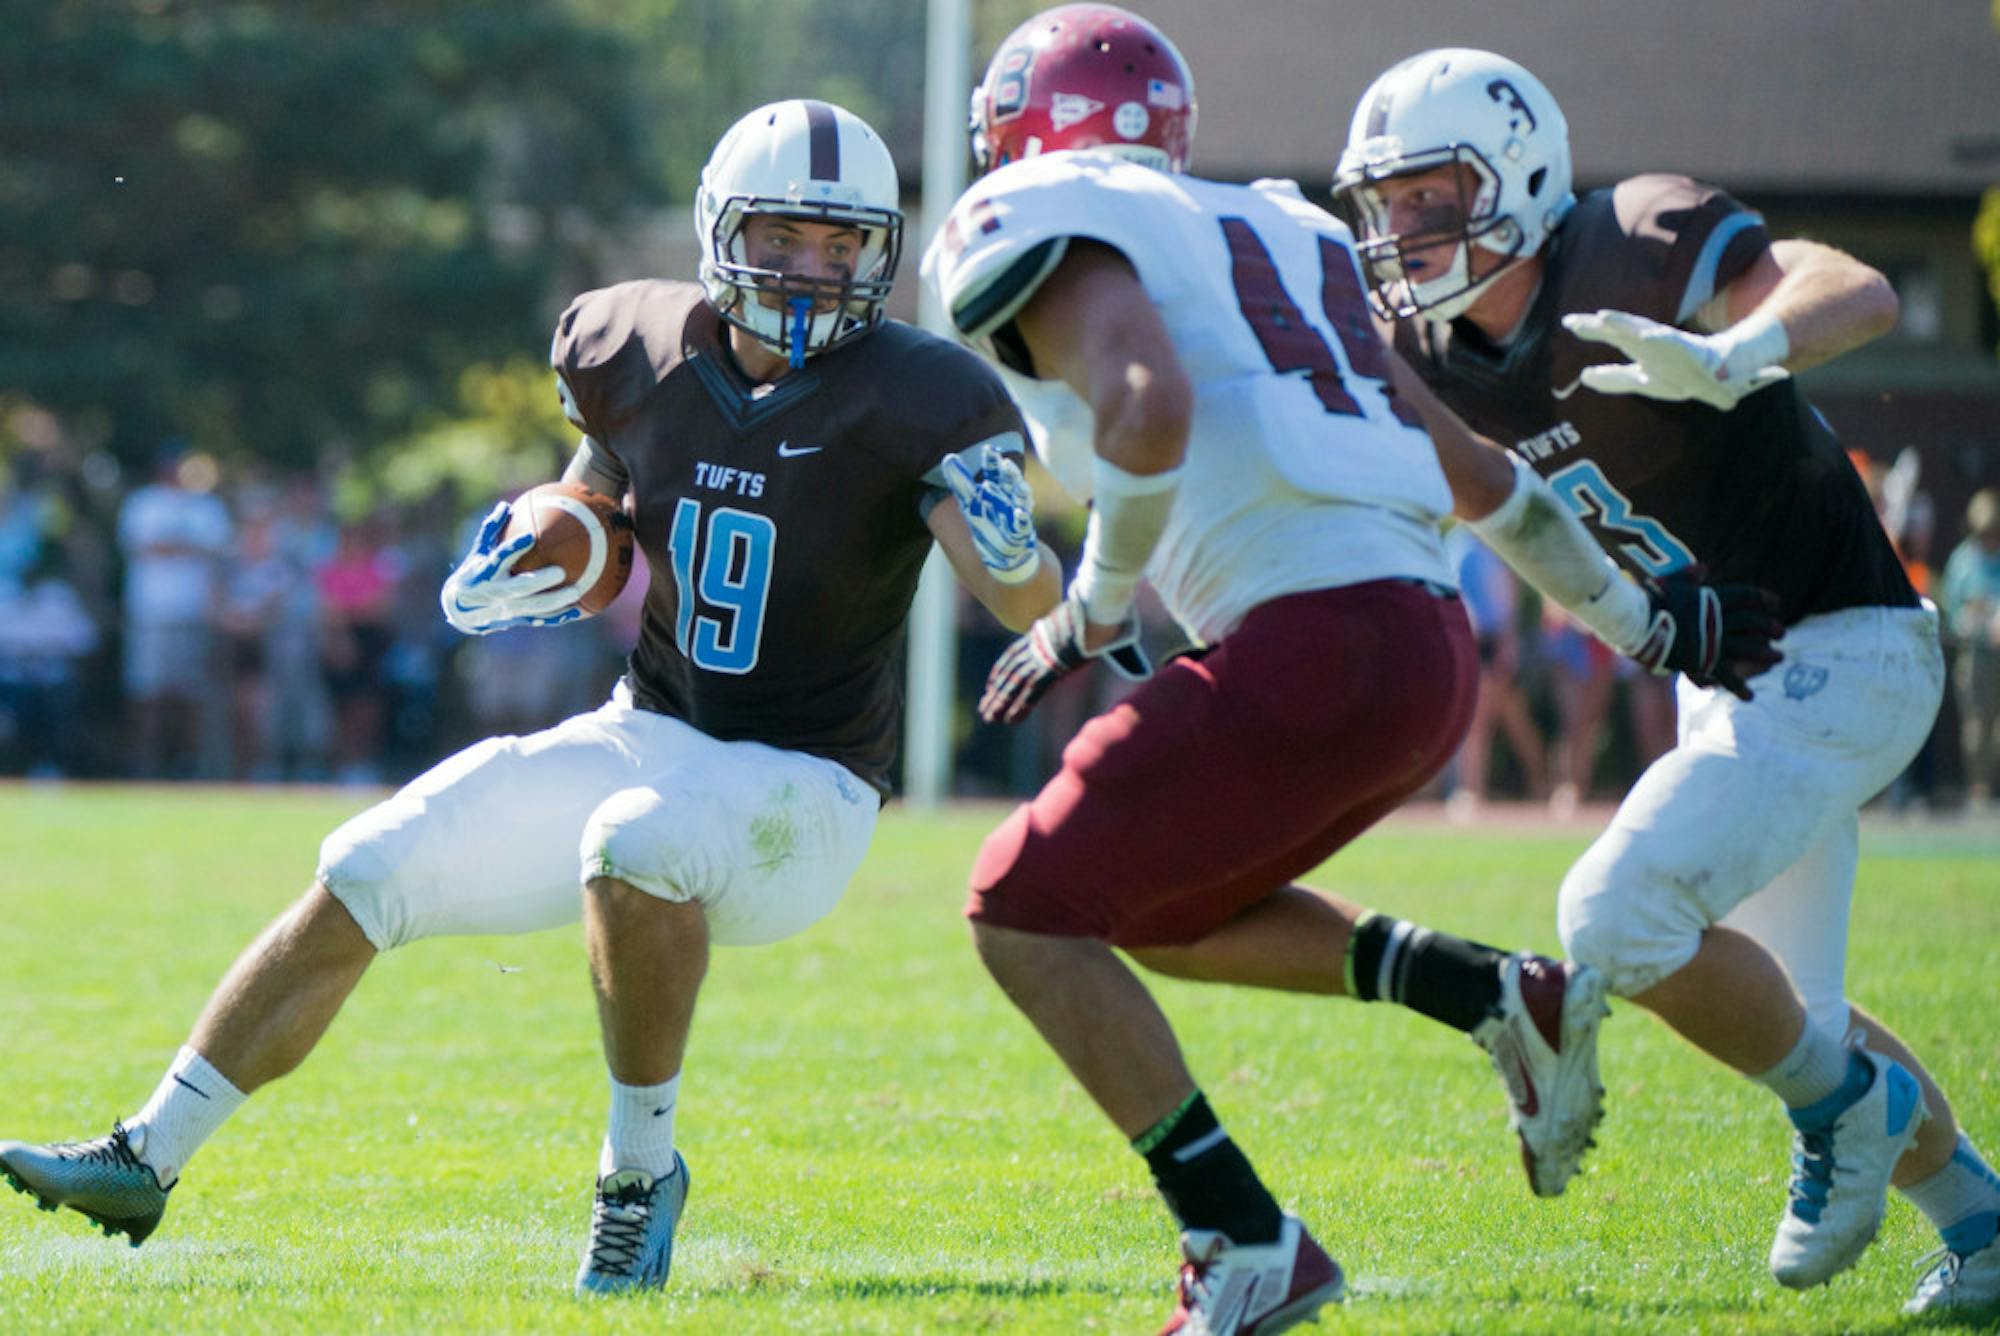 2014-09-27-Tufts-Football-Homecoming-Game-71